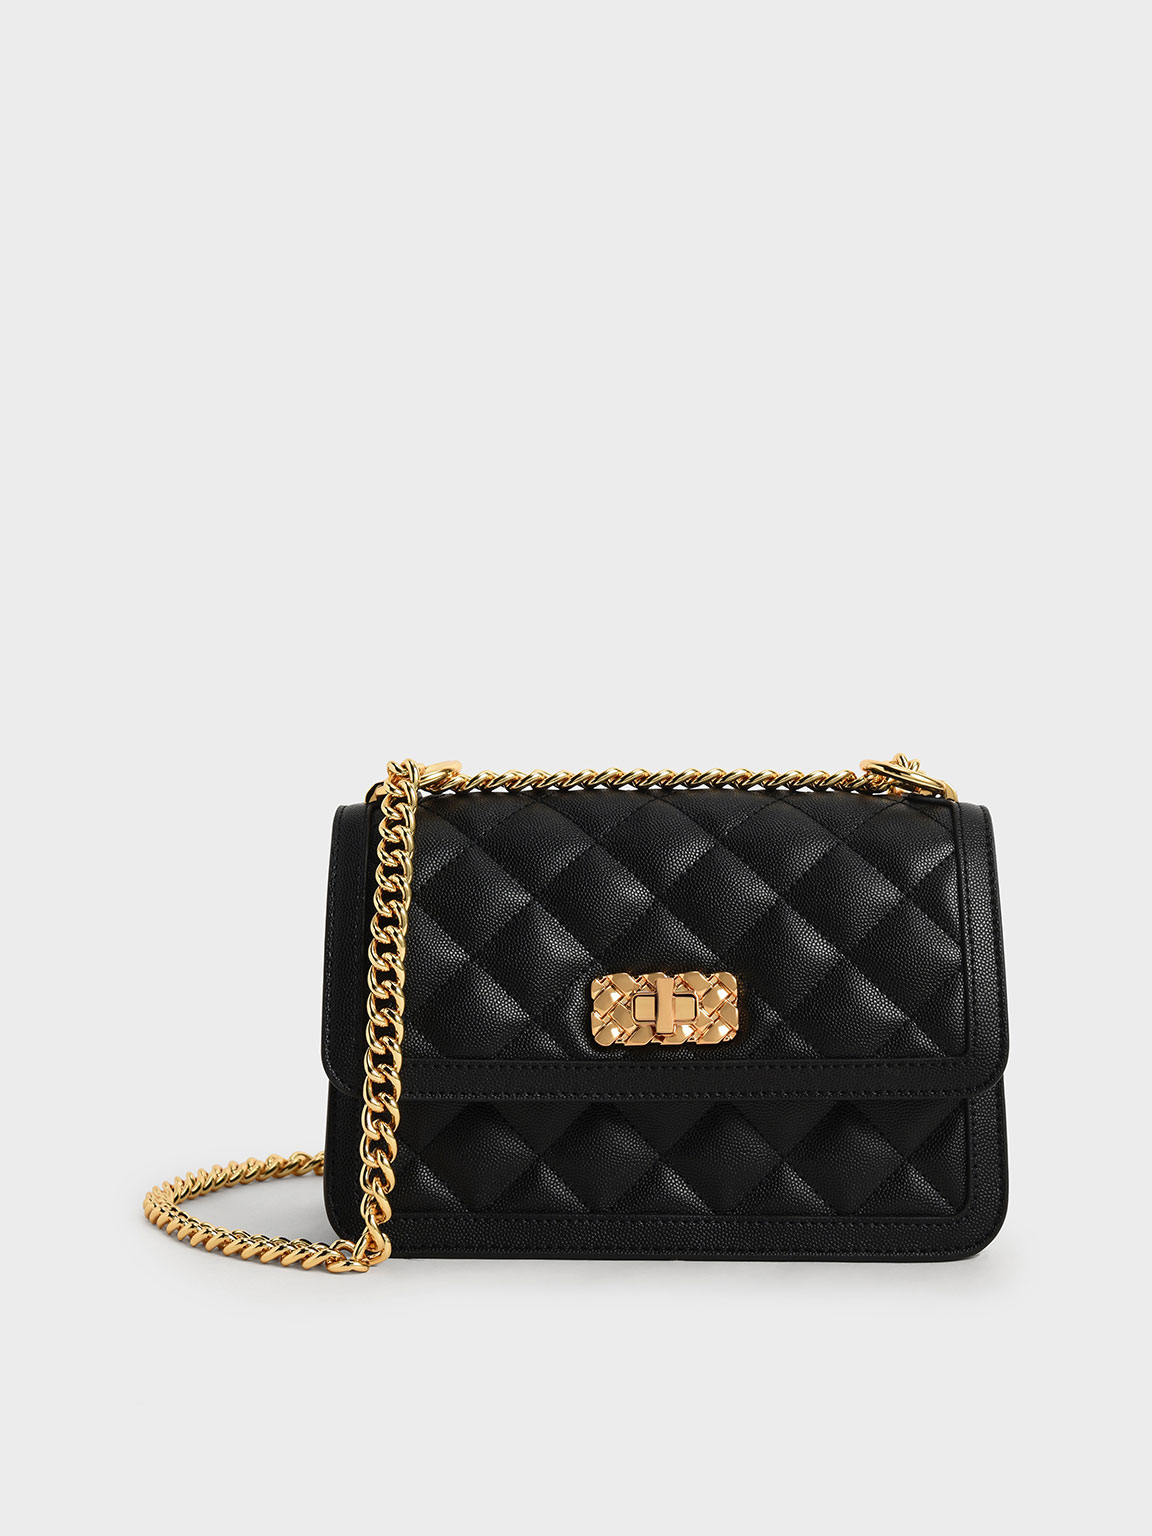 Charles & Keith Cressida Tweed Chain Strap Bag in Pink | Lyst